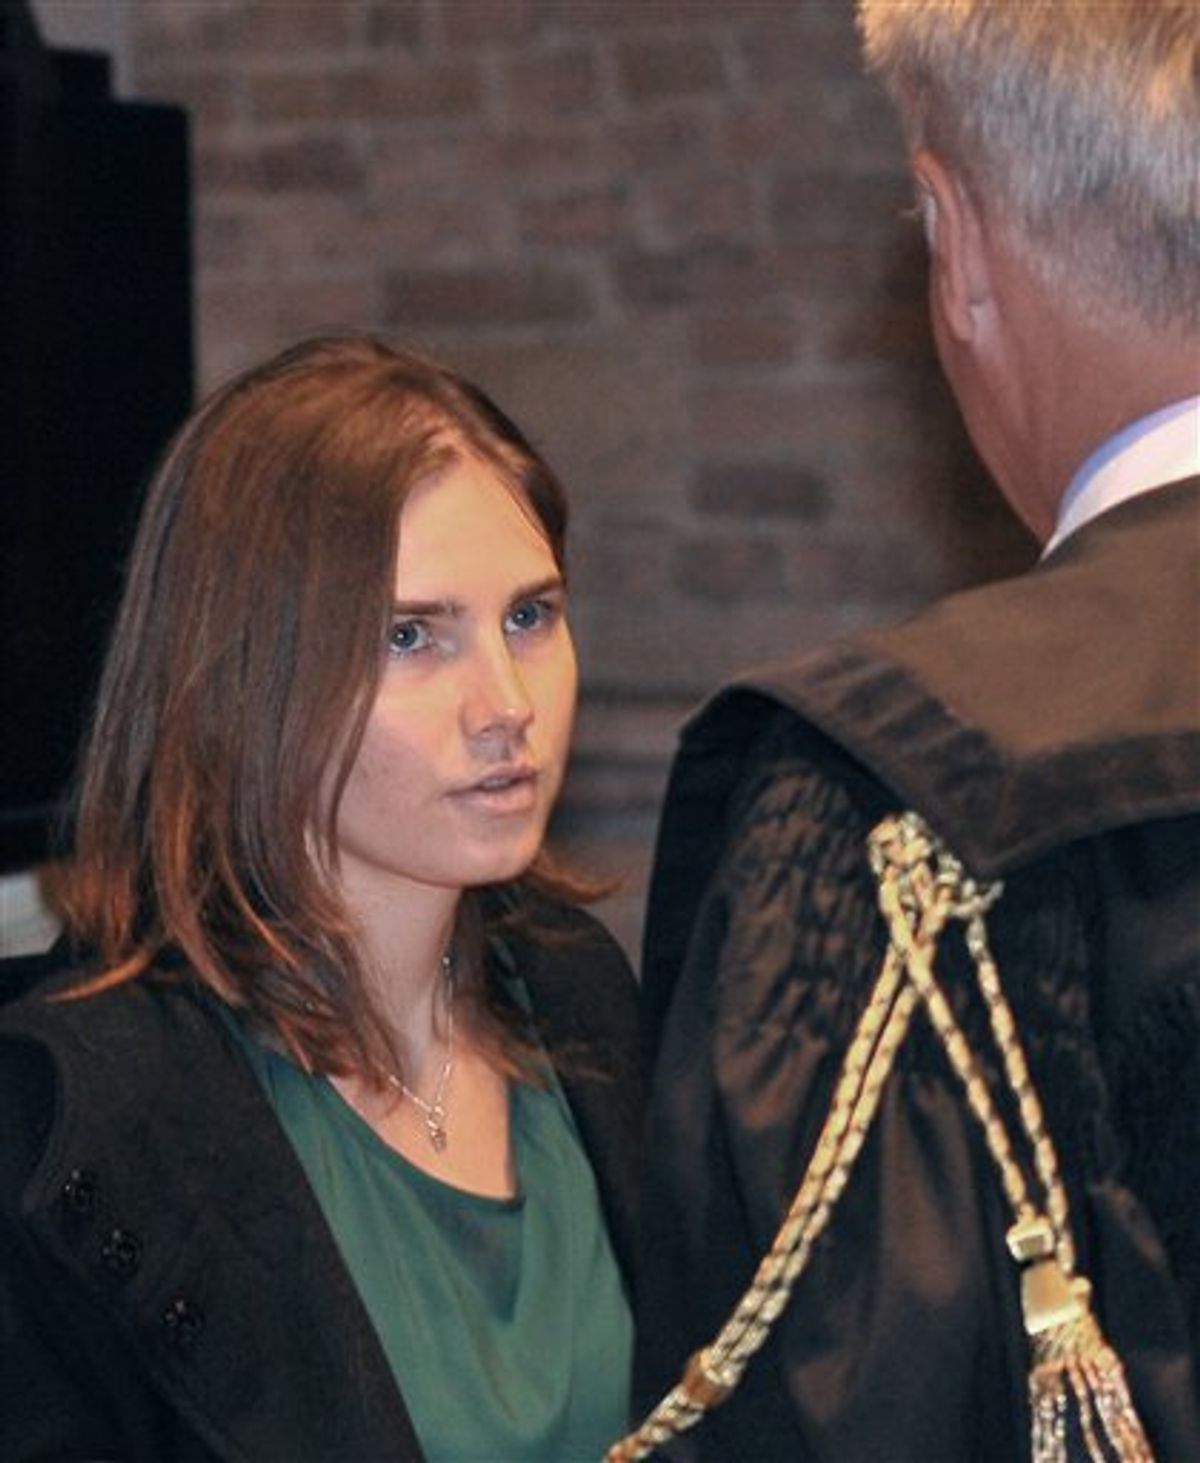 Amanda Knox talks with her lawyer Carlo Dalla Vedova upon arrival for an appeal hearing at the Perugia court, central Italy, Monday, Oct. 3, 2011.        (AP Photo/Antonio Calanni)